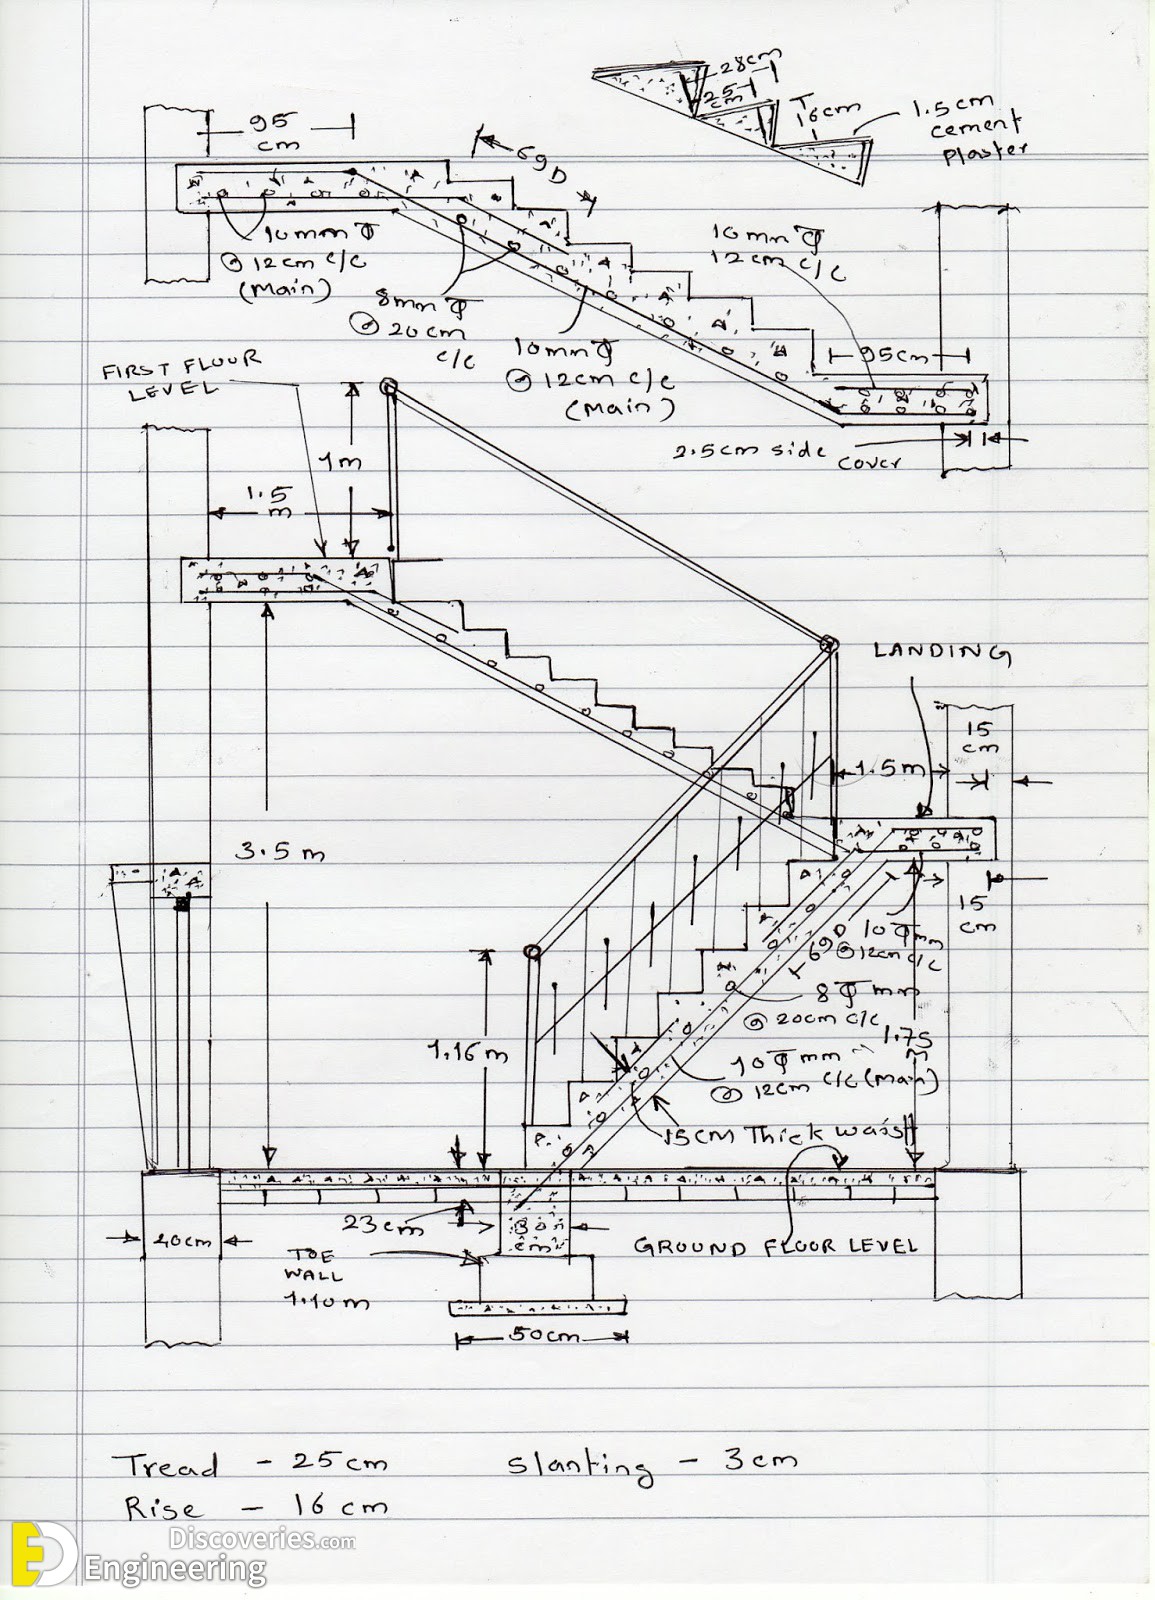 Concrete Quantity Calculations For The Staircase